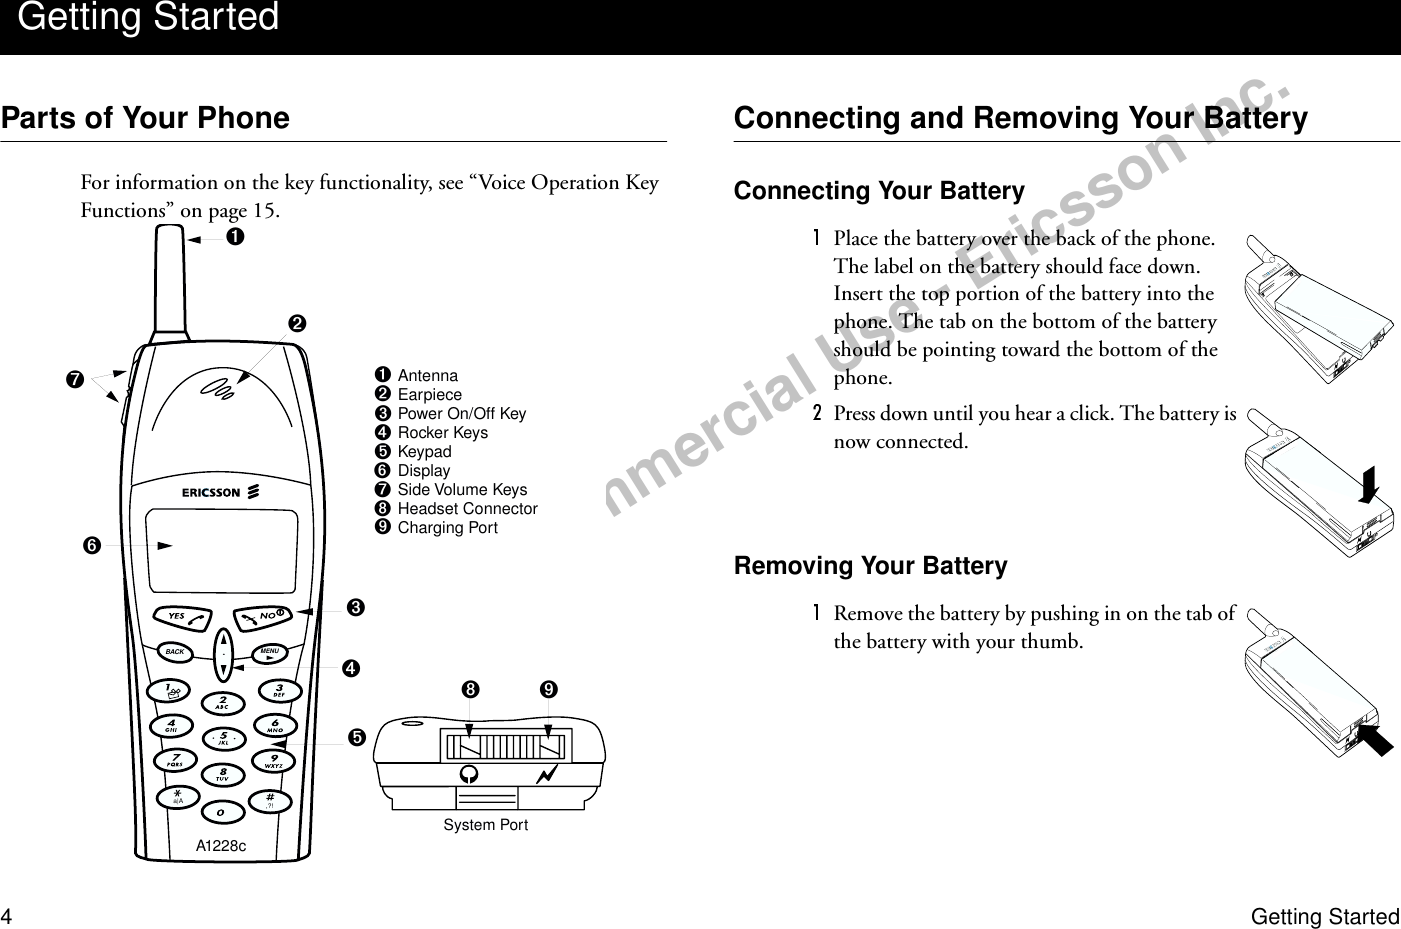 Draft - Not for Commercial Use - Ericsson Inc.4Getting StartedParts of Your PhoneFor information on the key functionality, see “Voice Operation Key Functions” on page 15.Connecting and Removing Your BatteryConnecting Your BatteryPlace the battery over the back of the phone. The label on the battery should face down. Insert the top portion of the battery into the phone. The tab on the bottom of the battery should be pointing toward the bottom of the phone.Press down until you hear a click. The battery is now connected.Removing Your BatteryRemove the battery by pushing in on the tab of the battery with your thumb.Getting StartedMENUA1228ca|A ,?!System PortAntennaEarpiecePower On/Off KeyRocker KeysKeypadDisplaySide Volume KeysHeadset ConnectorCharging Port➊➋➌➍➎➏➐➑➒➊➋➌➍➎➏➐➑➒BACK